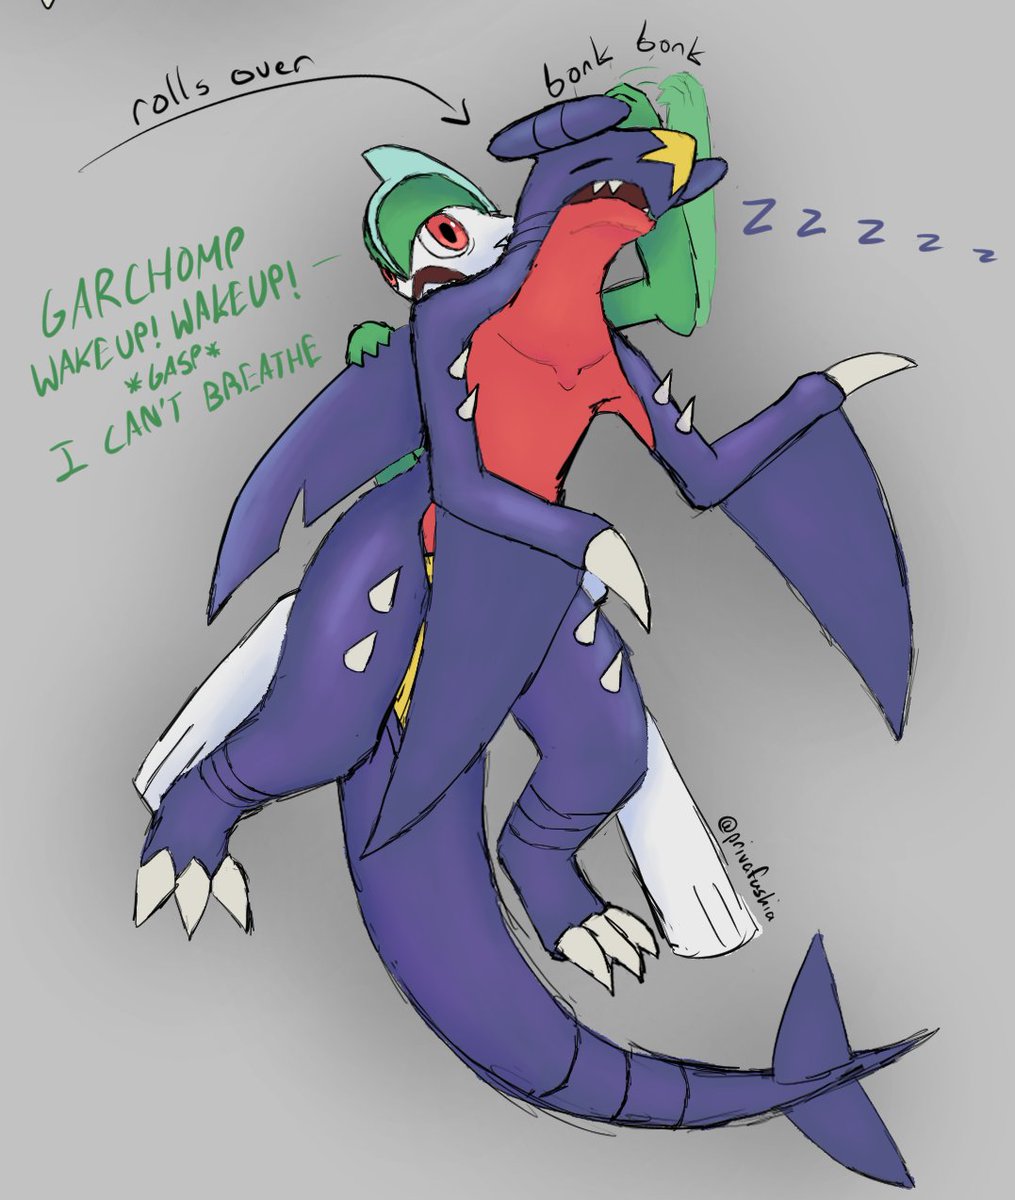 gallade doesn't like being the big spoon anymore...

#gallchomp #gallade #garchomp